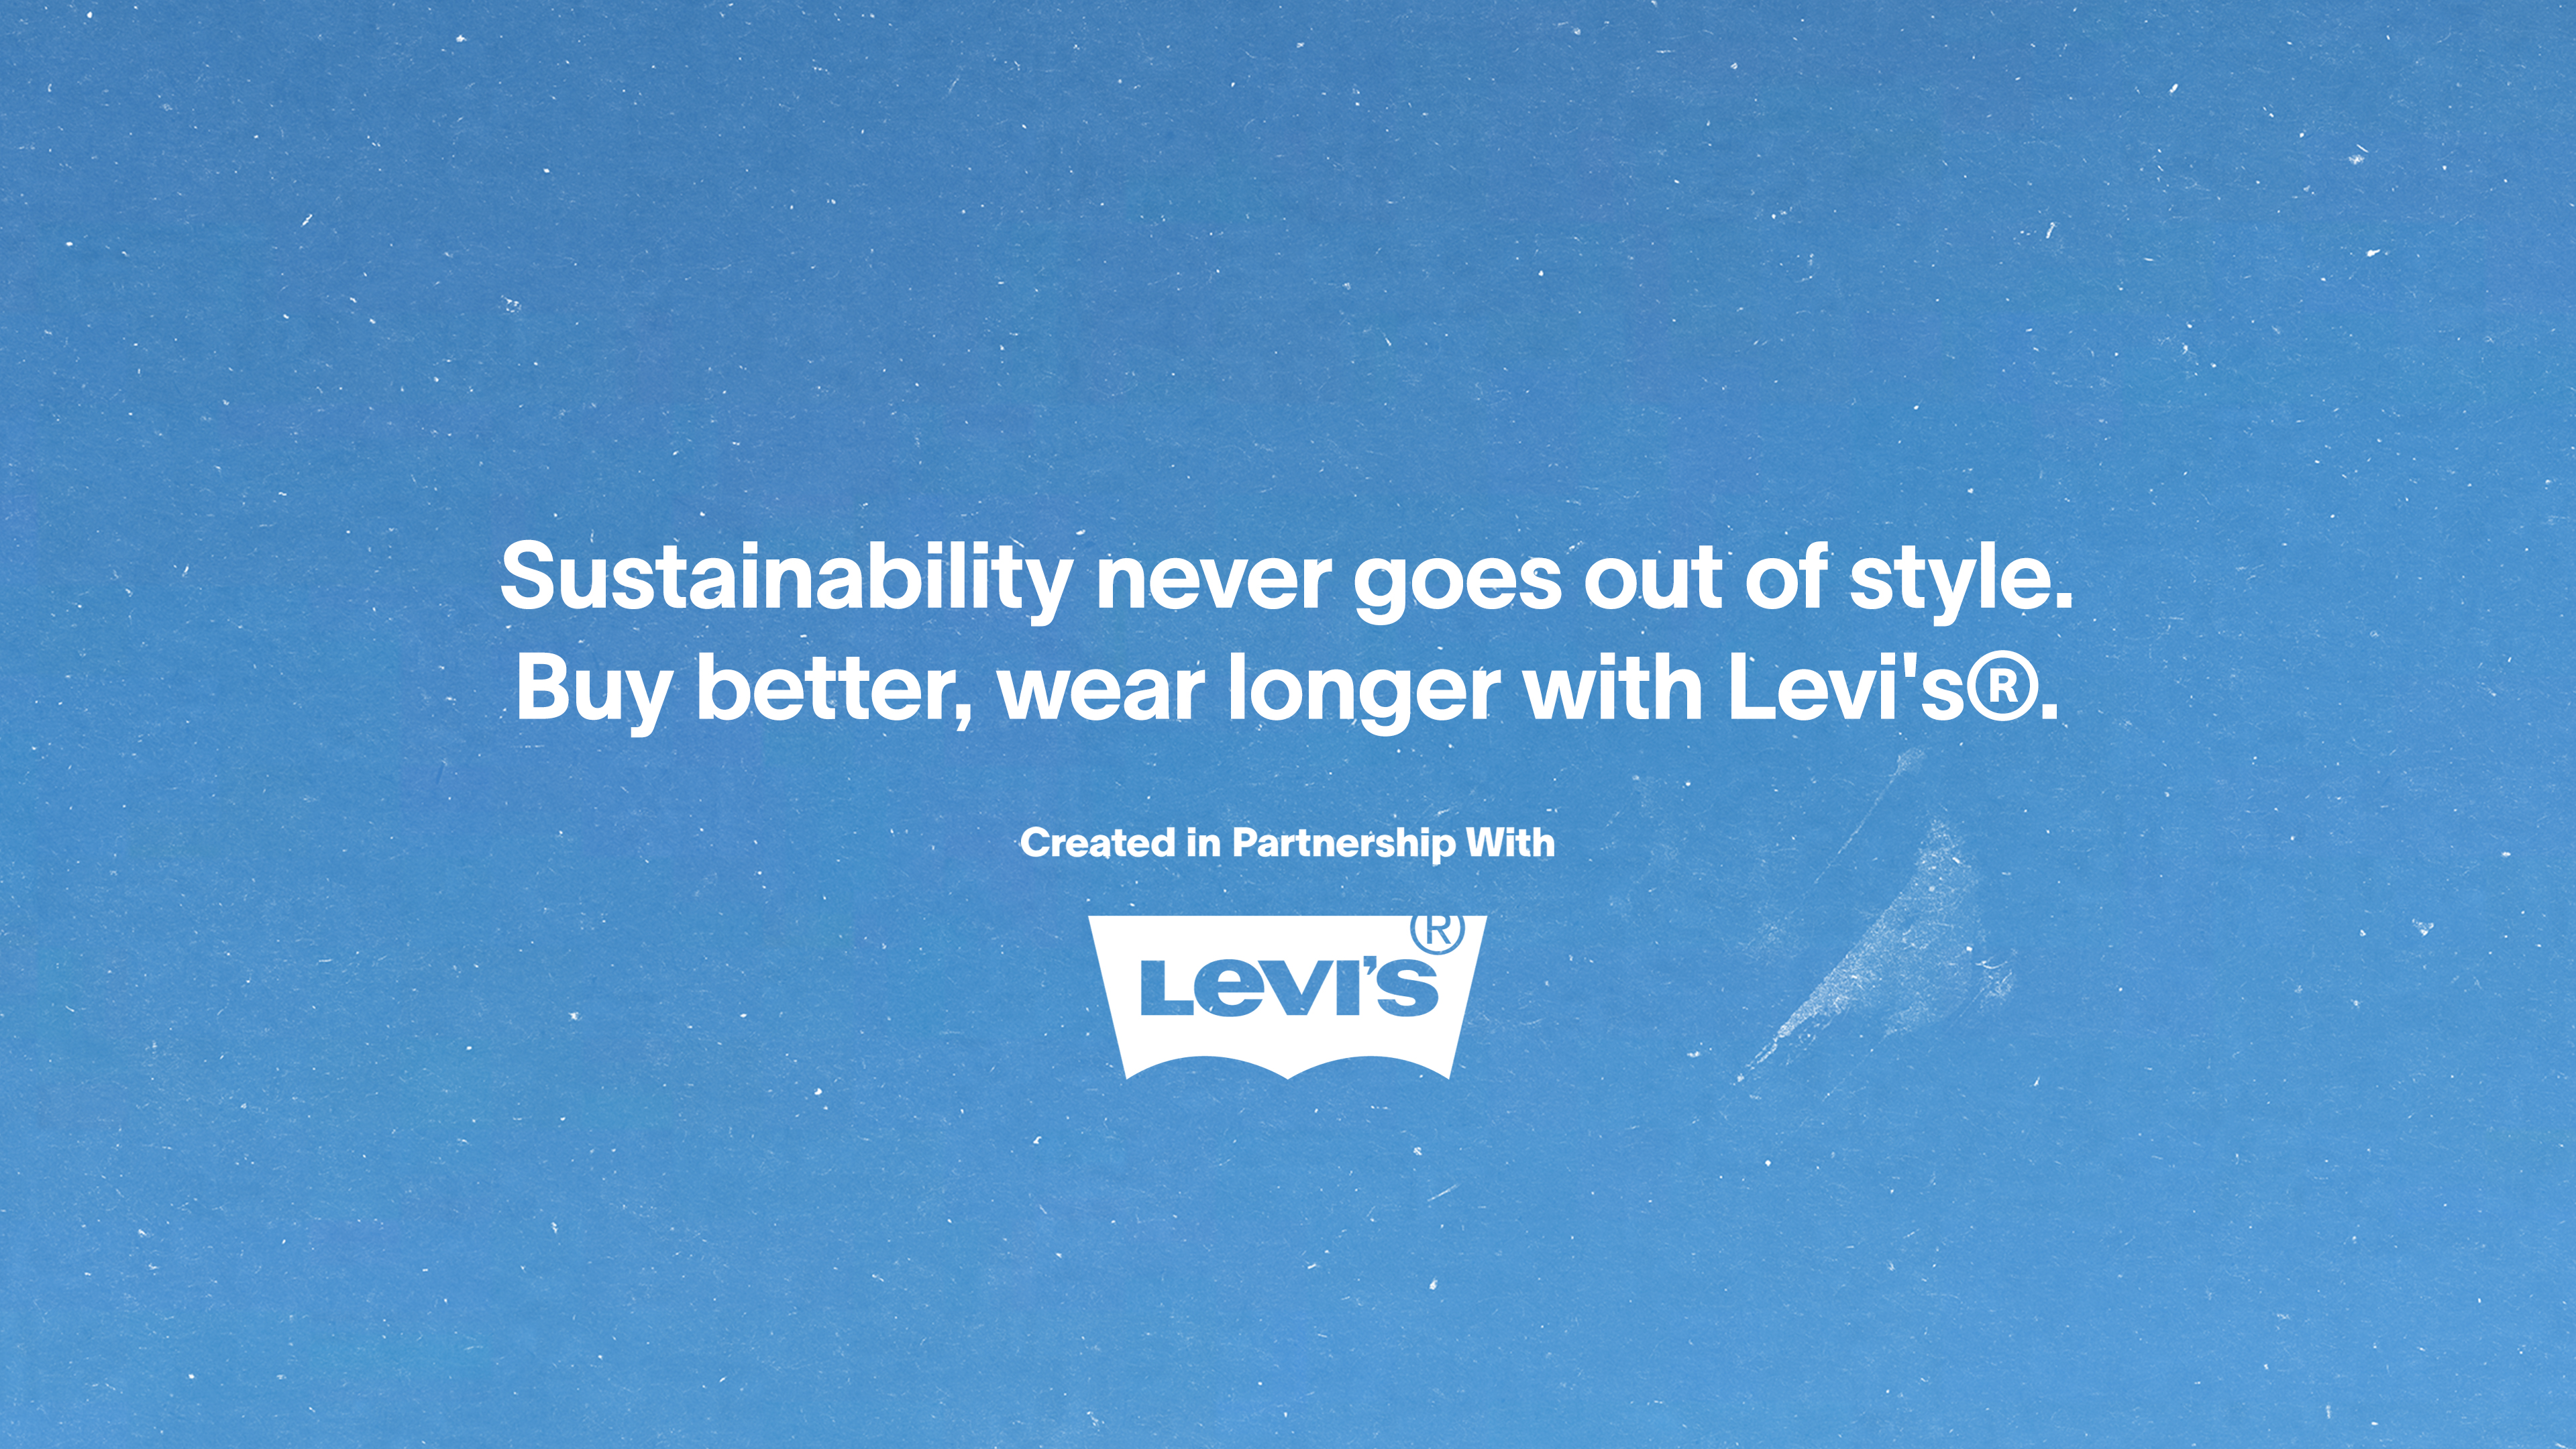 created in partnership with levis